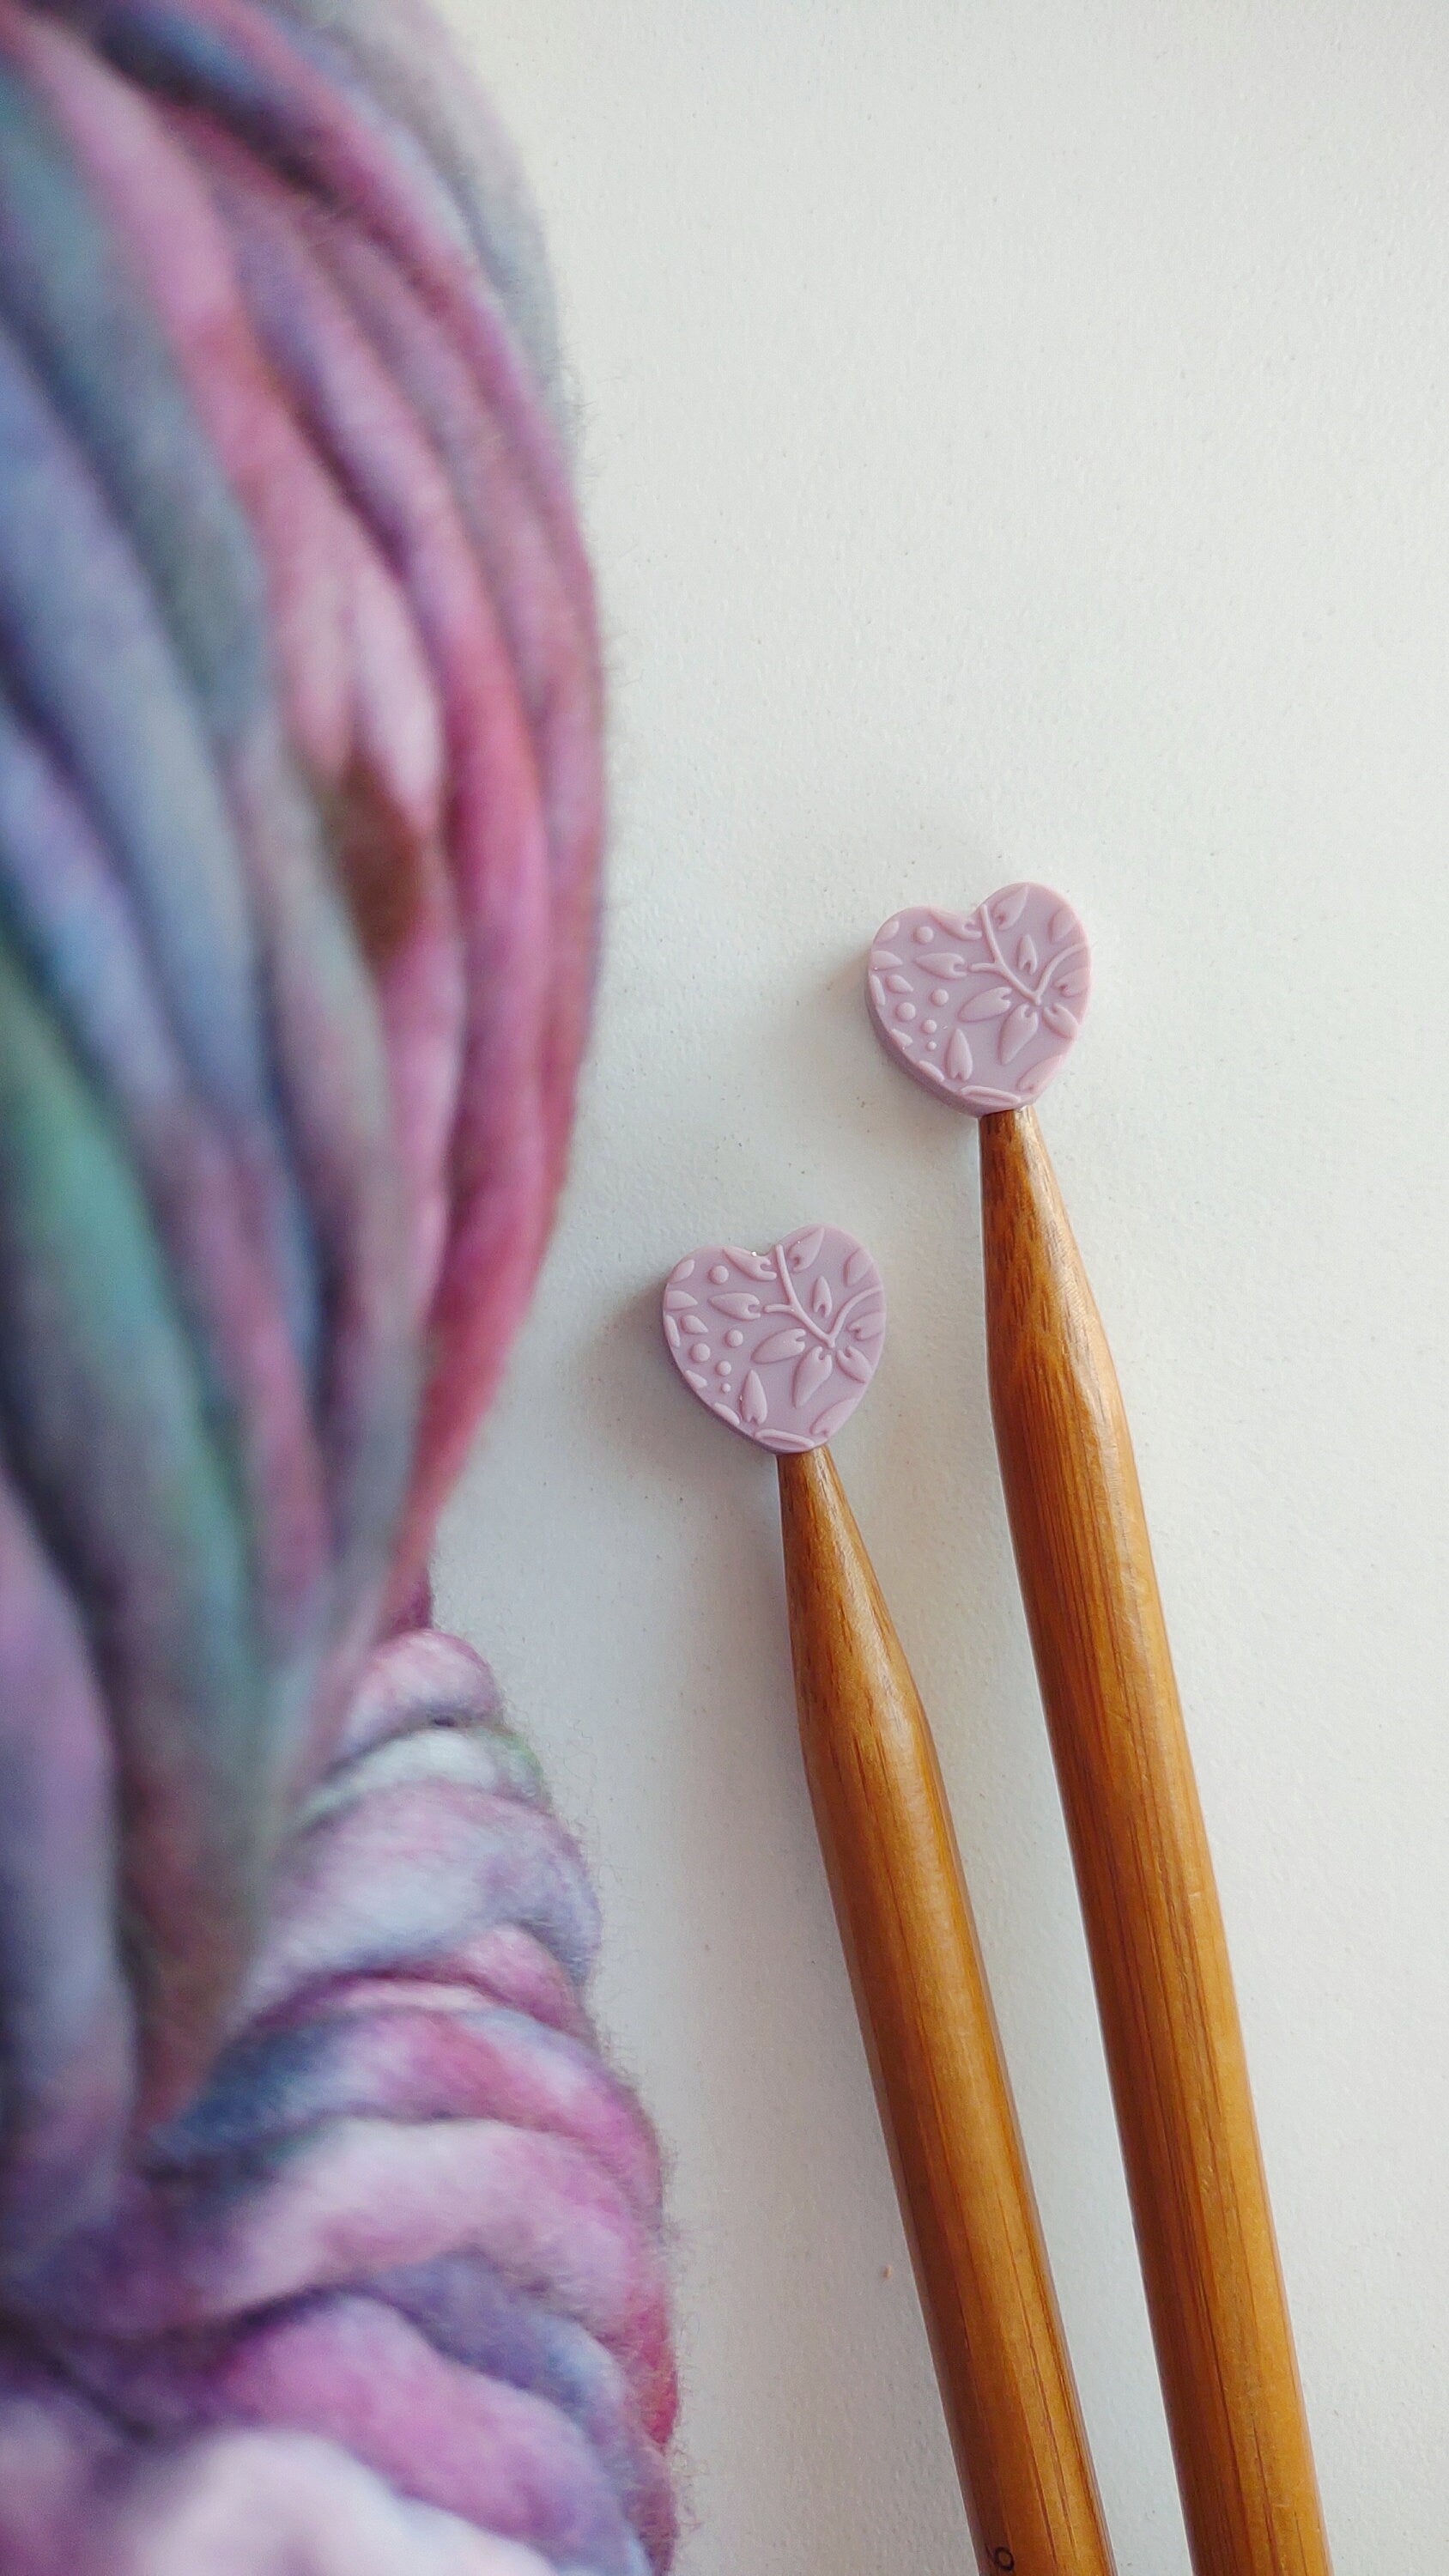 Mauve Embossed Heart Knitting Needle Stitch Stoppers. Needle Protectors. Knitting Notions, Accessories, Supplies, Tools.